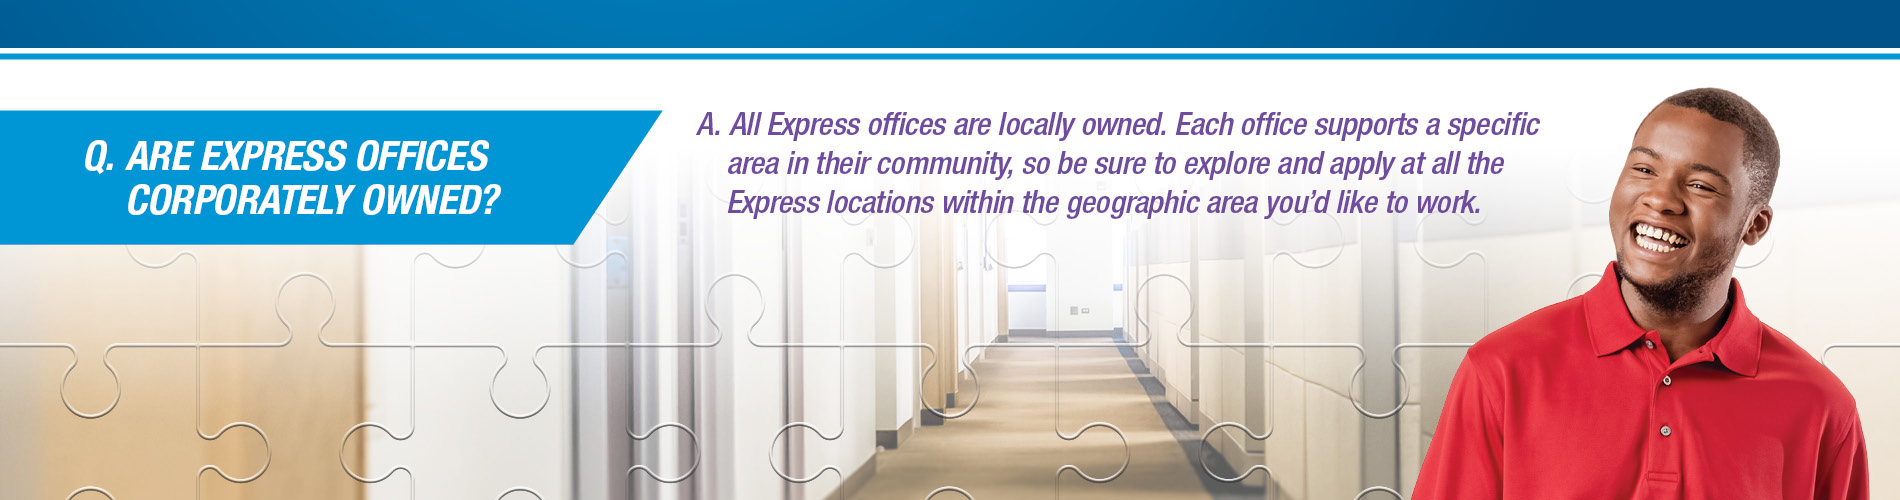 What Is Express? - Are Express Offices Corporately Owned?